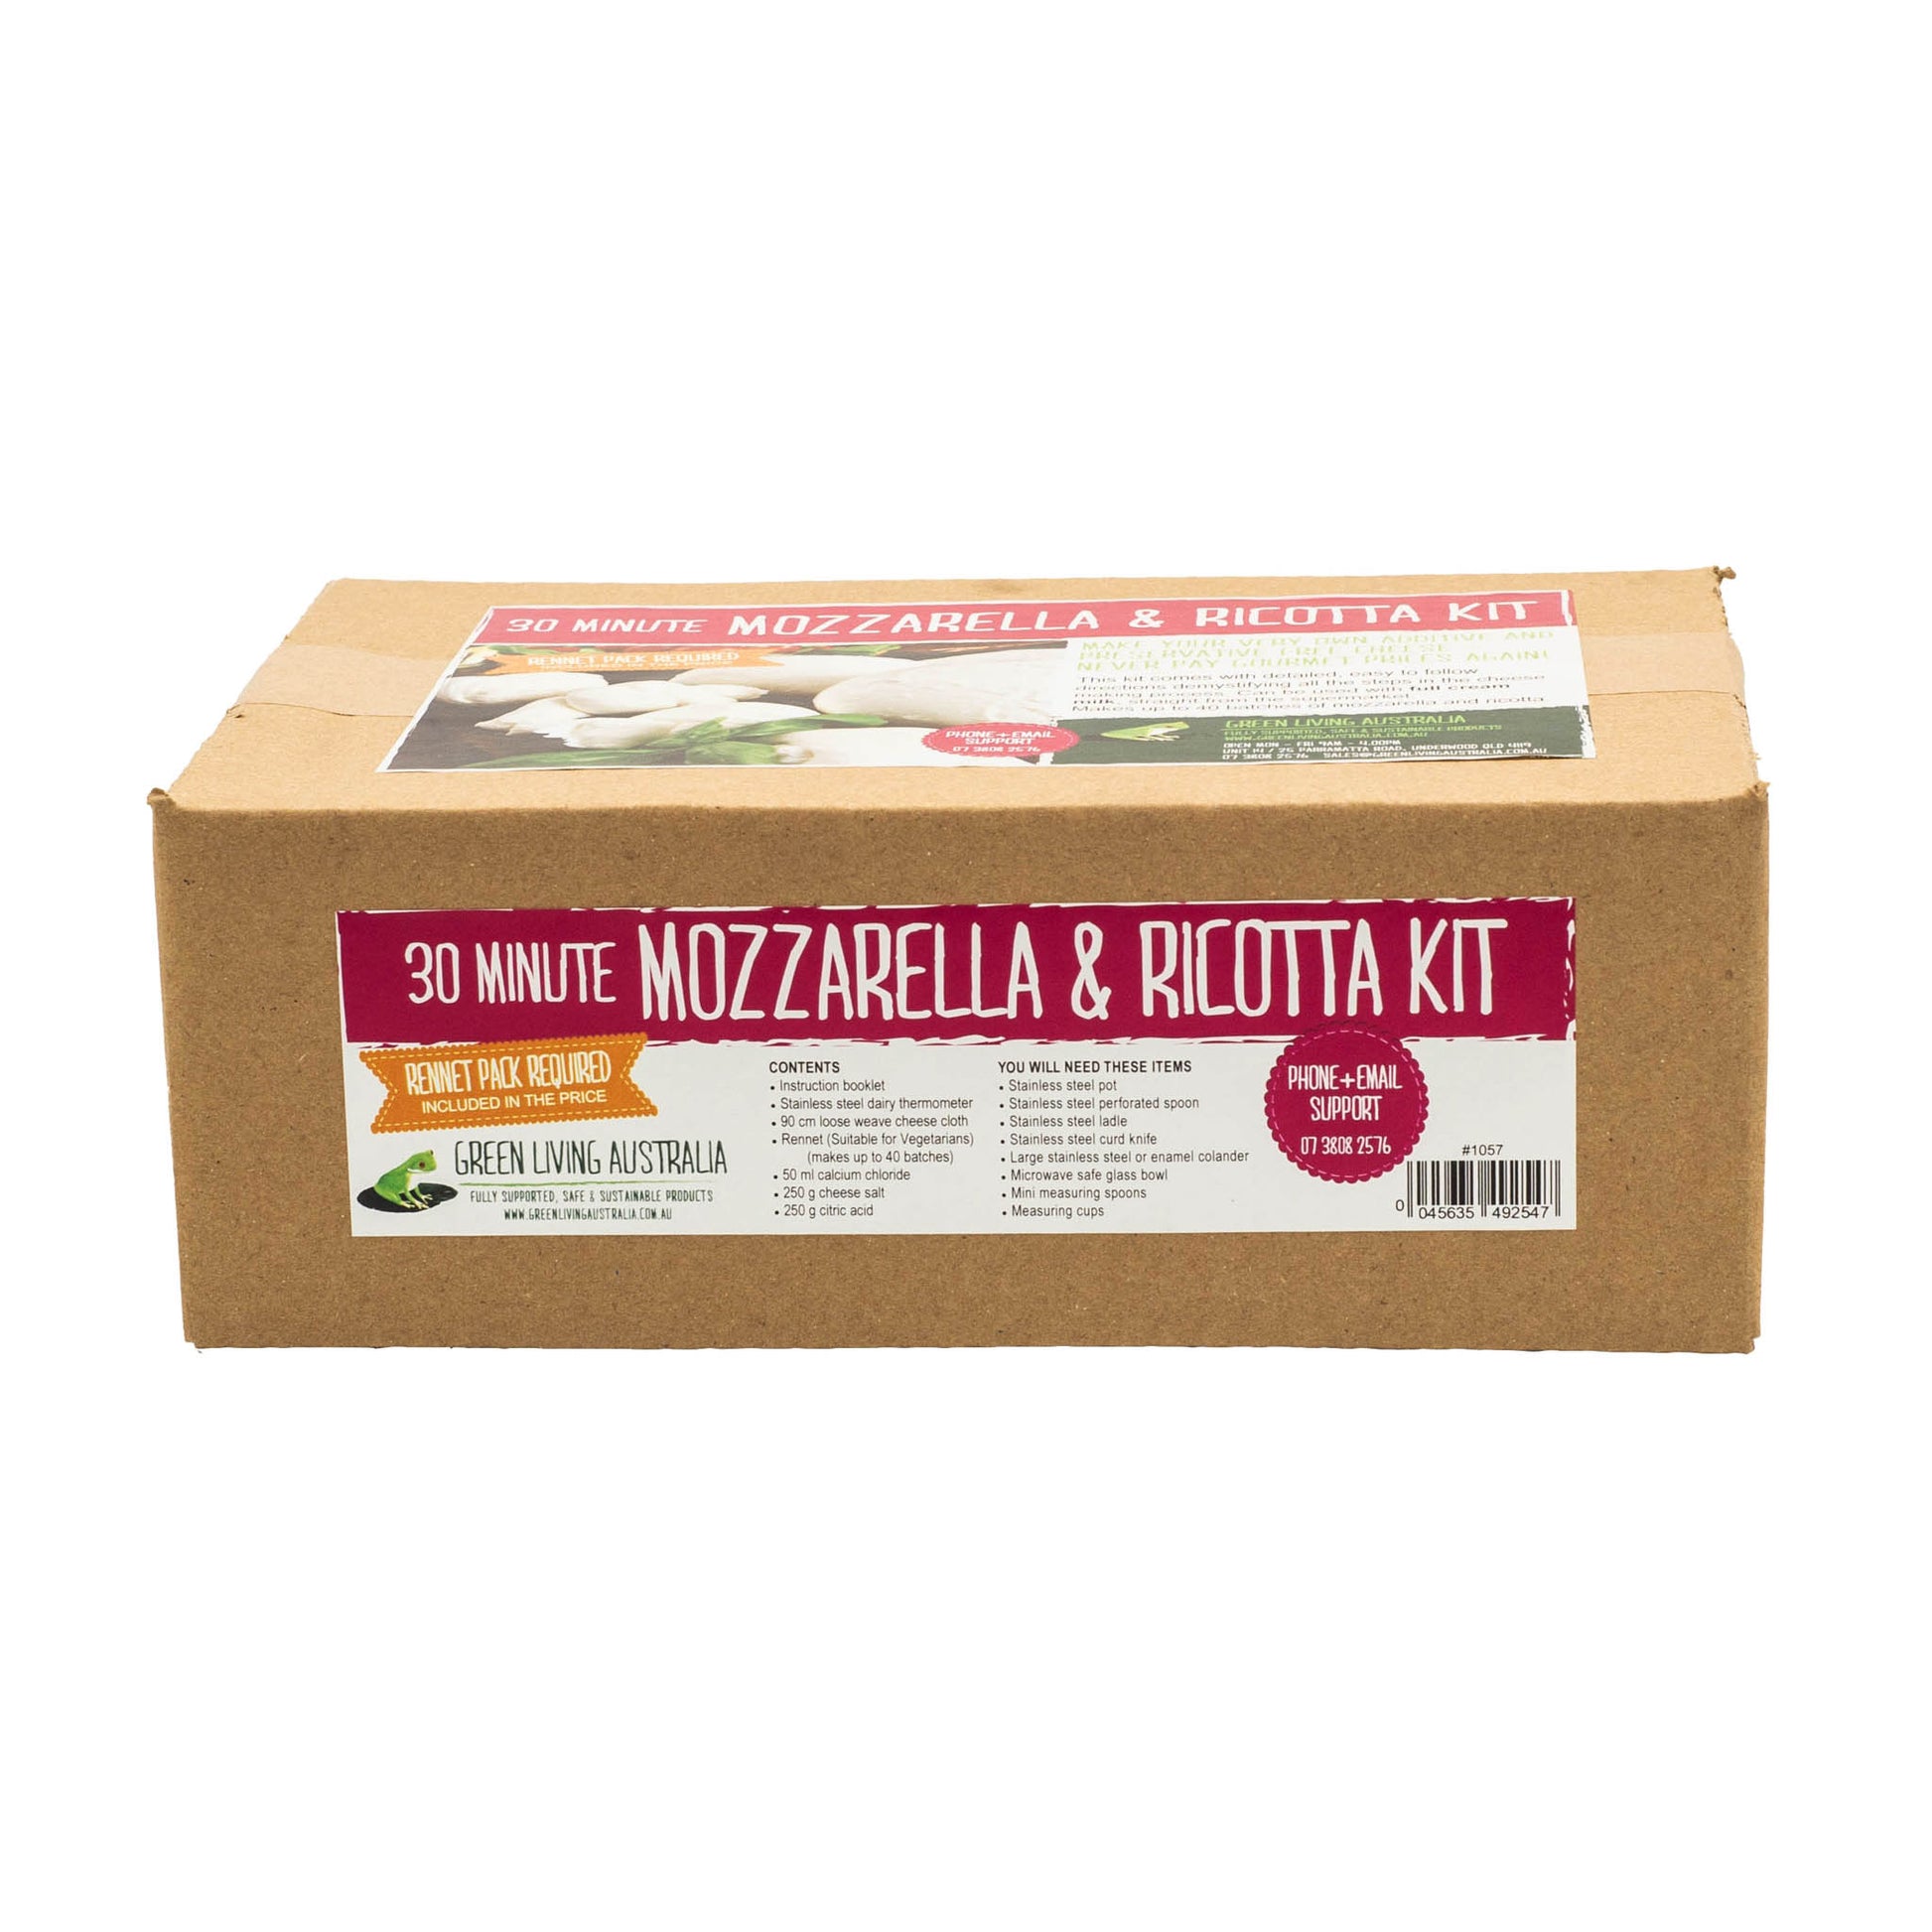 Mozzarella and Ricotta cheese making kit contents and instructions